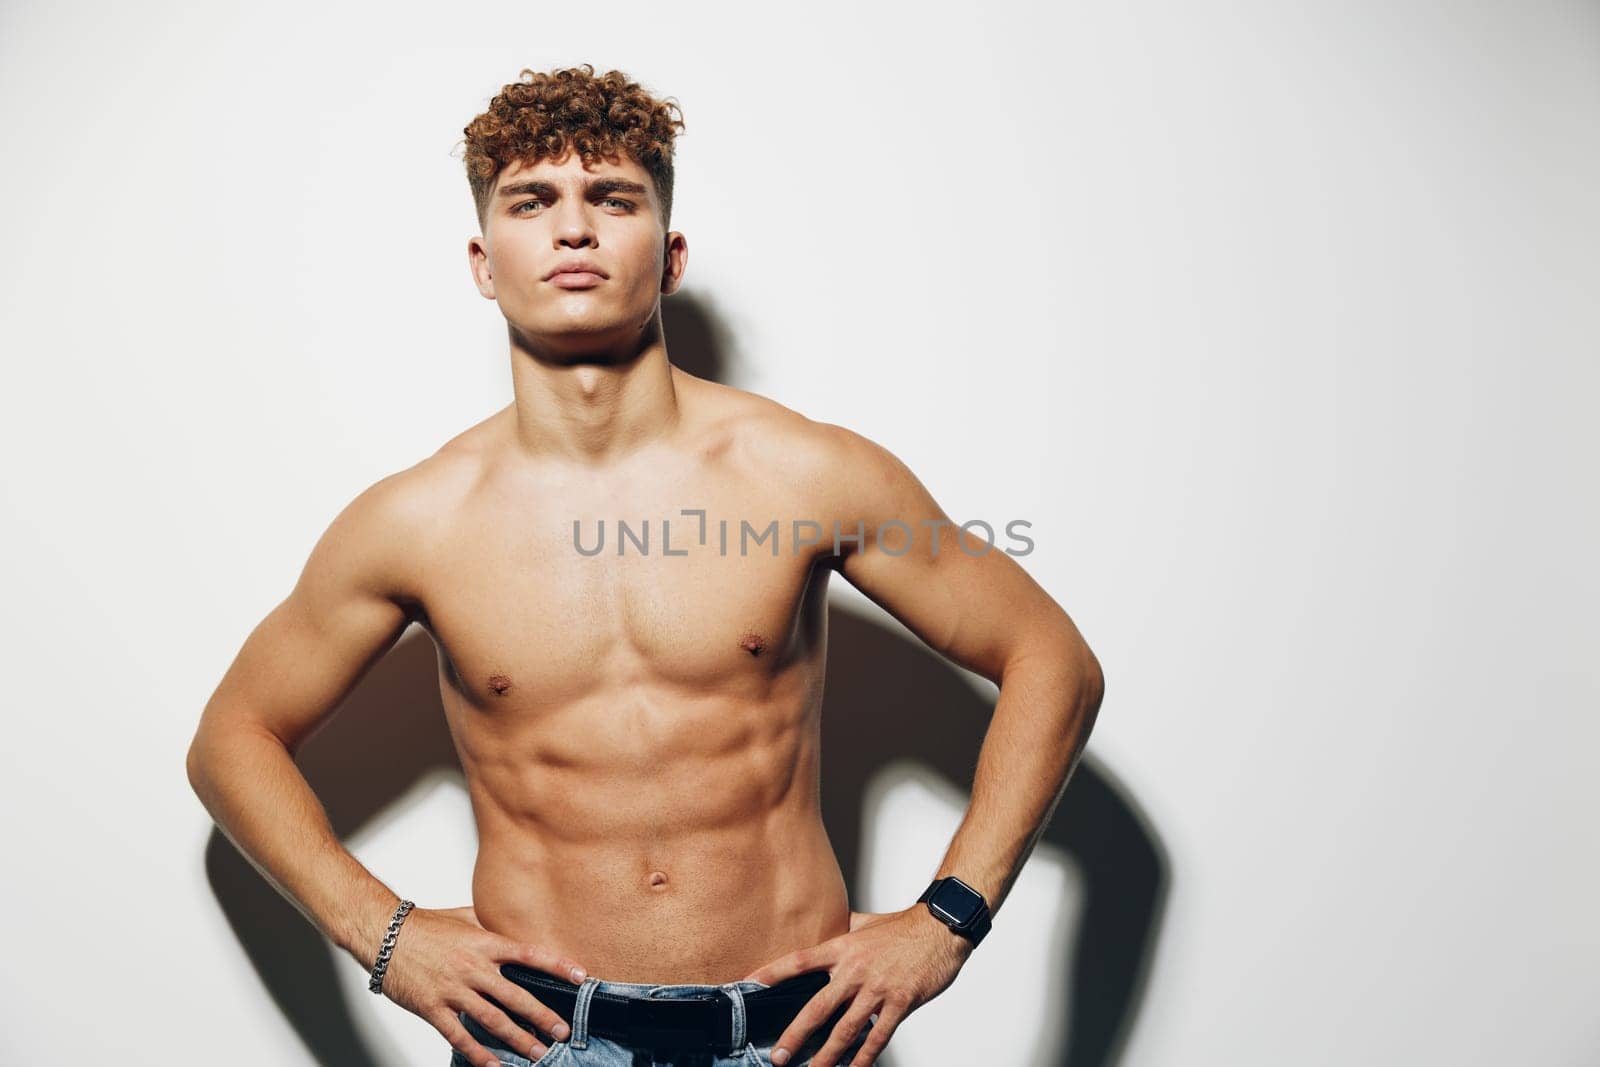 man background model body person guy strong young athletic fitness attractive care sexy standing